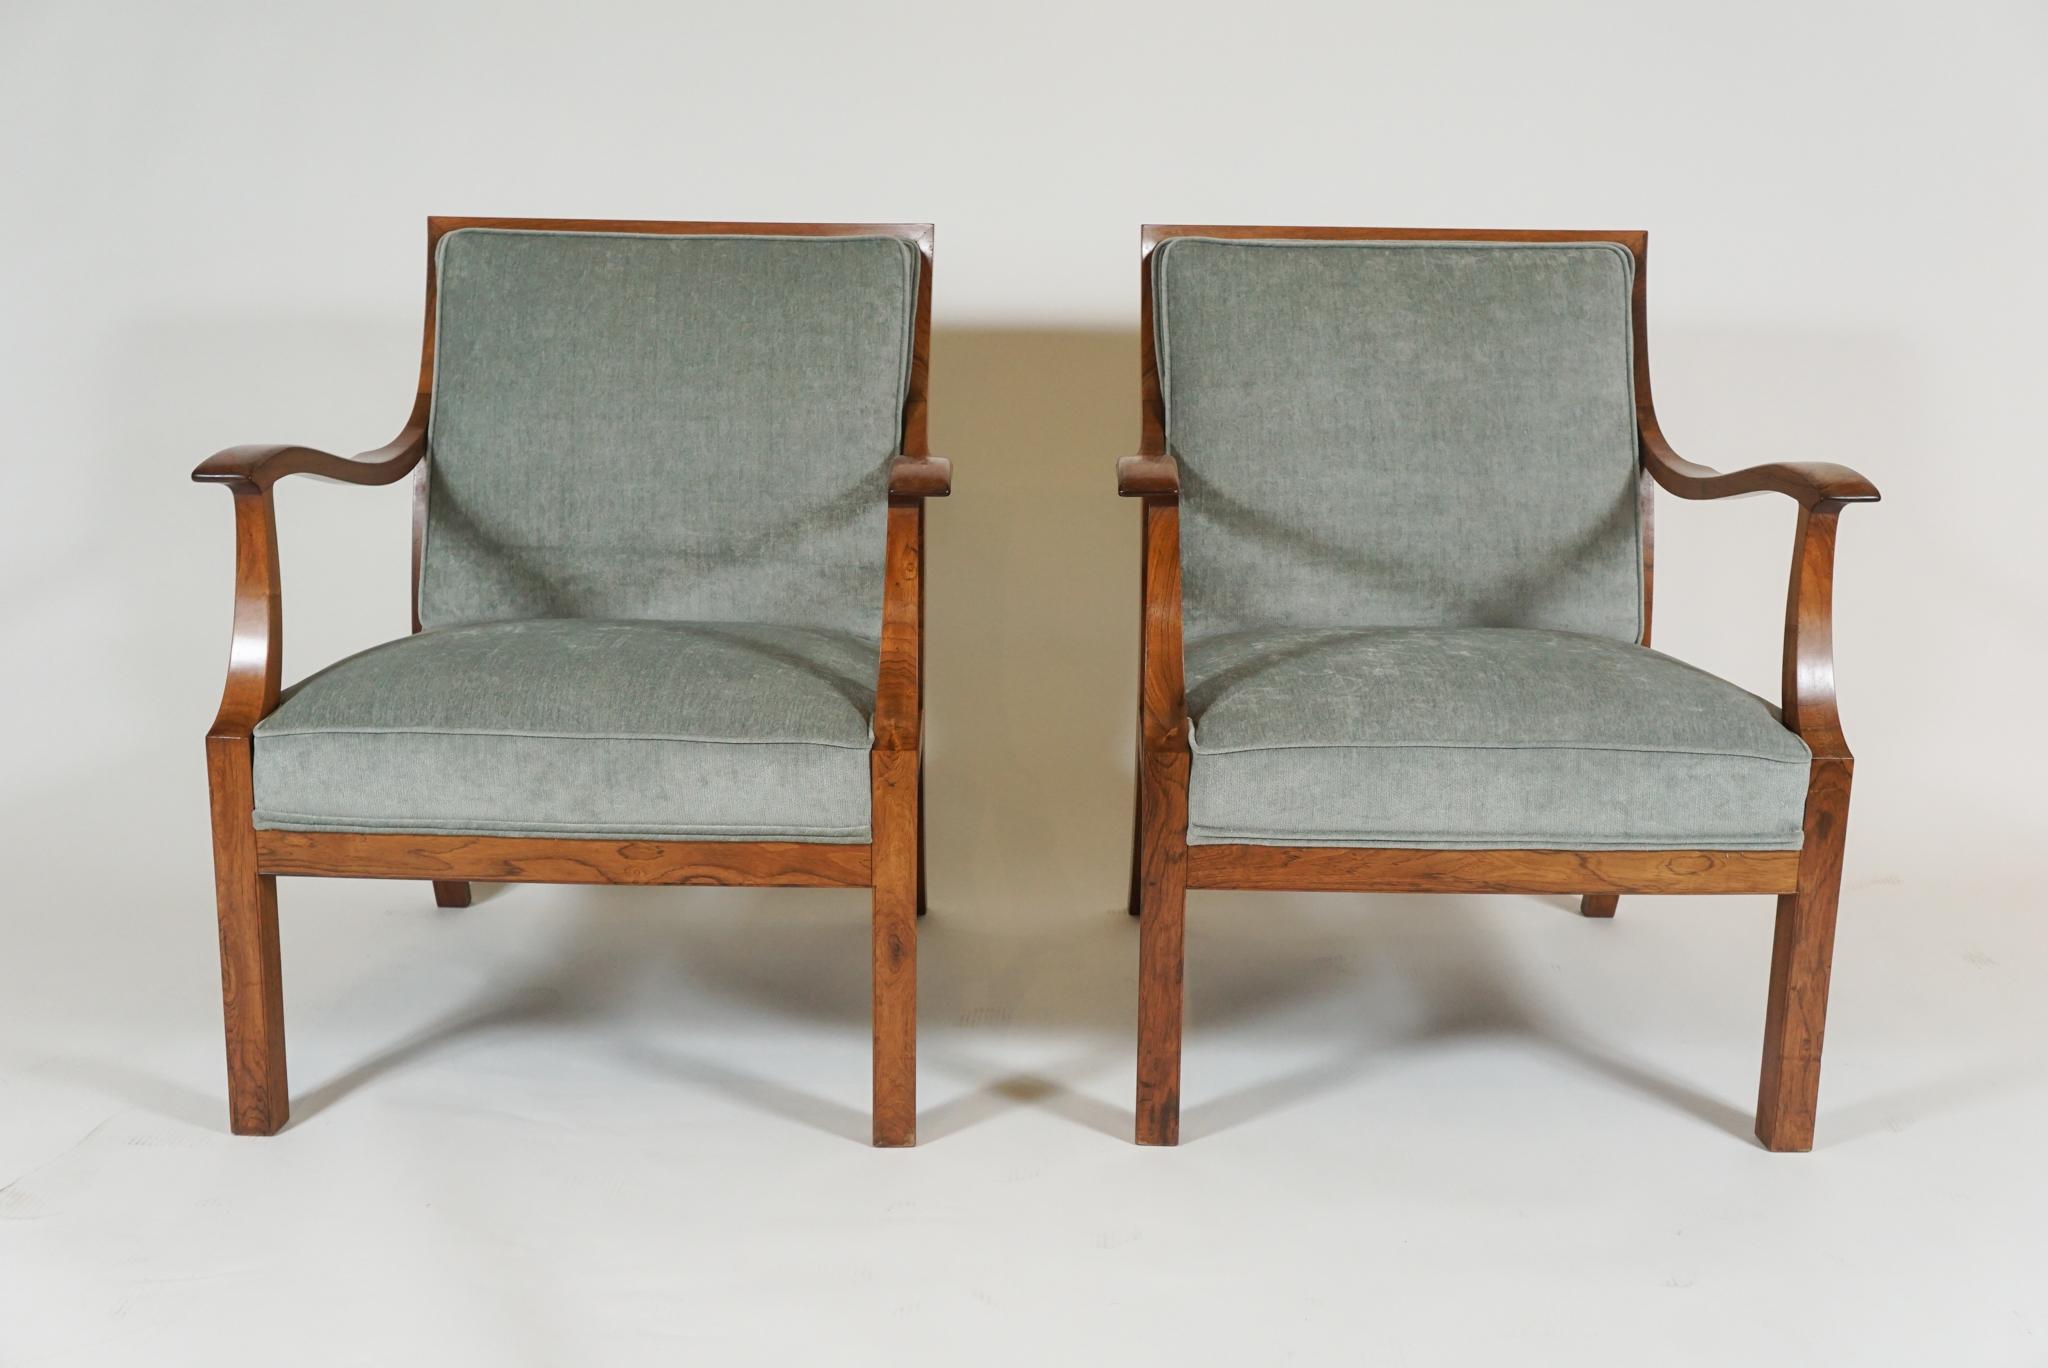 Pair of handsome open armchairs by well-known Danish designer, Frits Henningsen, who achieved high standard of quality with exclusively handmade pieces. In mellow rosewood from 1960s newly upholstered in a pale blue velveteen fabric.